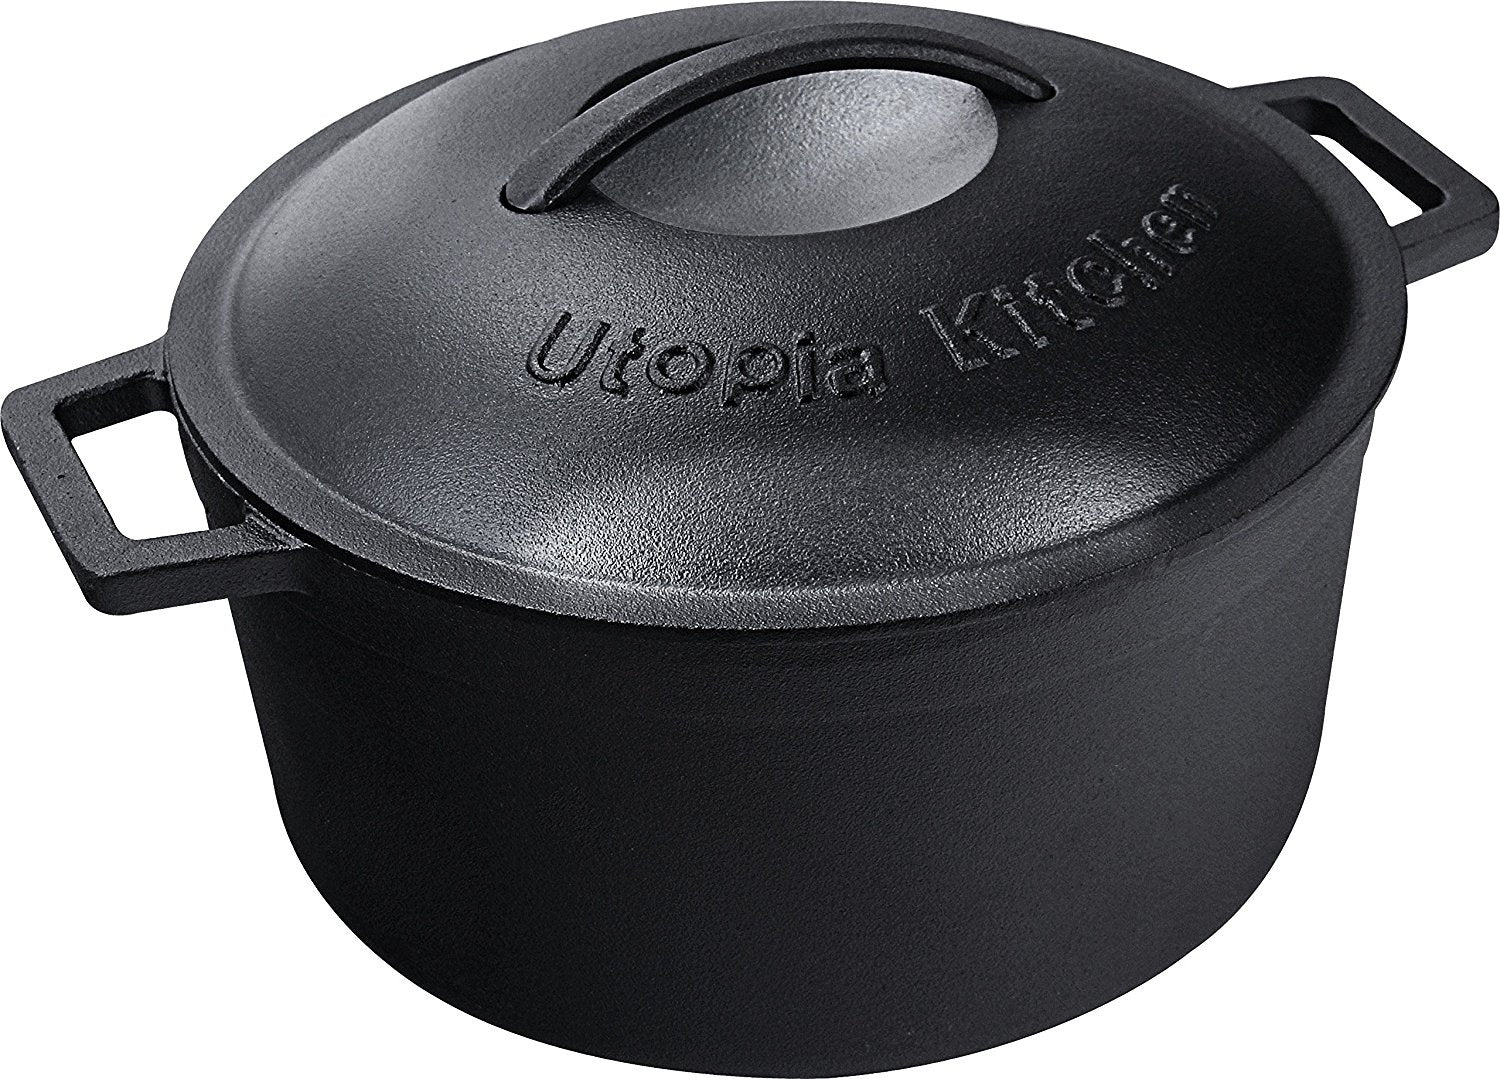 Source Cast Iron Dutch Oven Pot With Lid 2-In-1 Pre-Seasoned 5qt Dutch Oven  Cast Iron Cookware For Frying Camping Cooking and Baking on m.